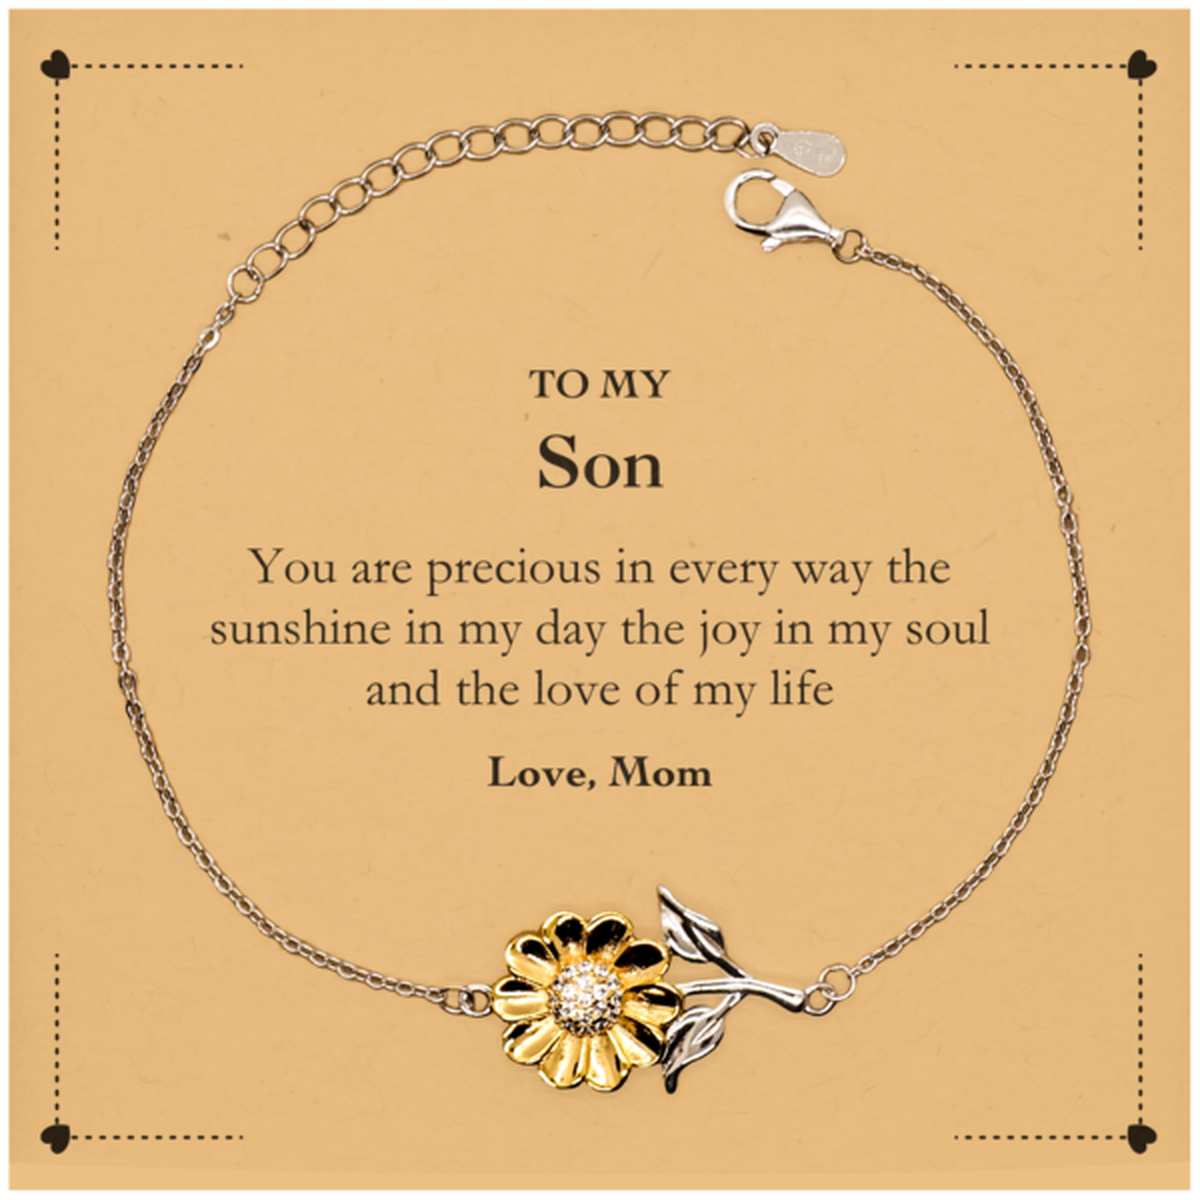 Graduation Gifts for Son Sunflower Bracelet Present from Mom, Christmas Son Birthday Gifts Son You are precious in every way the sunshine in my day. Love, Mom